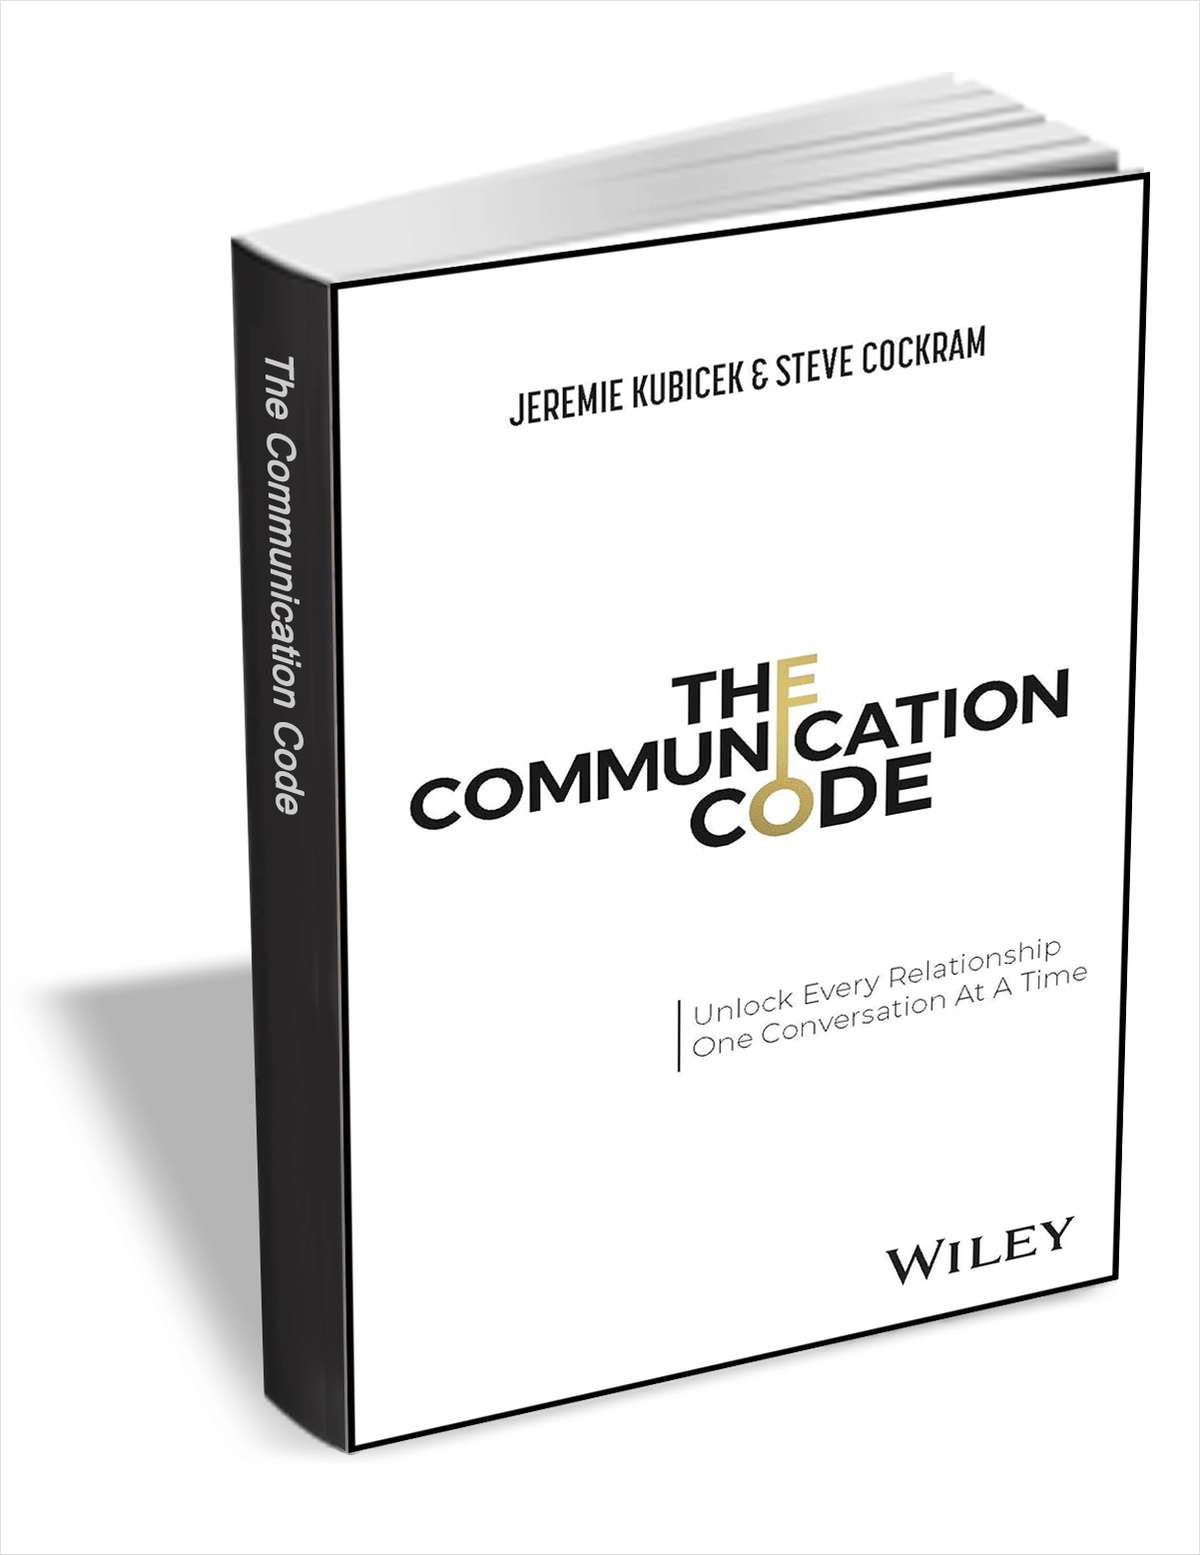 The Communication Code: Unlock Every Relationship, One Conversation at a Time ($17.00 Value) FREE for a Limited Time